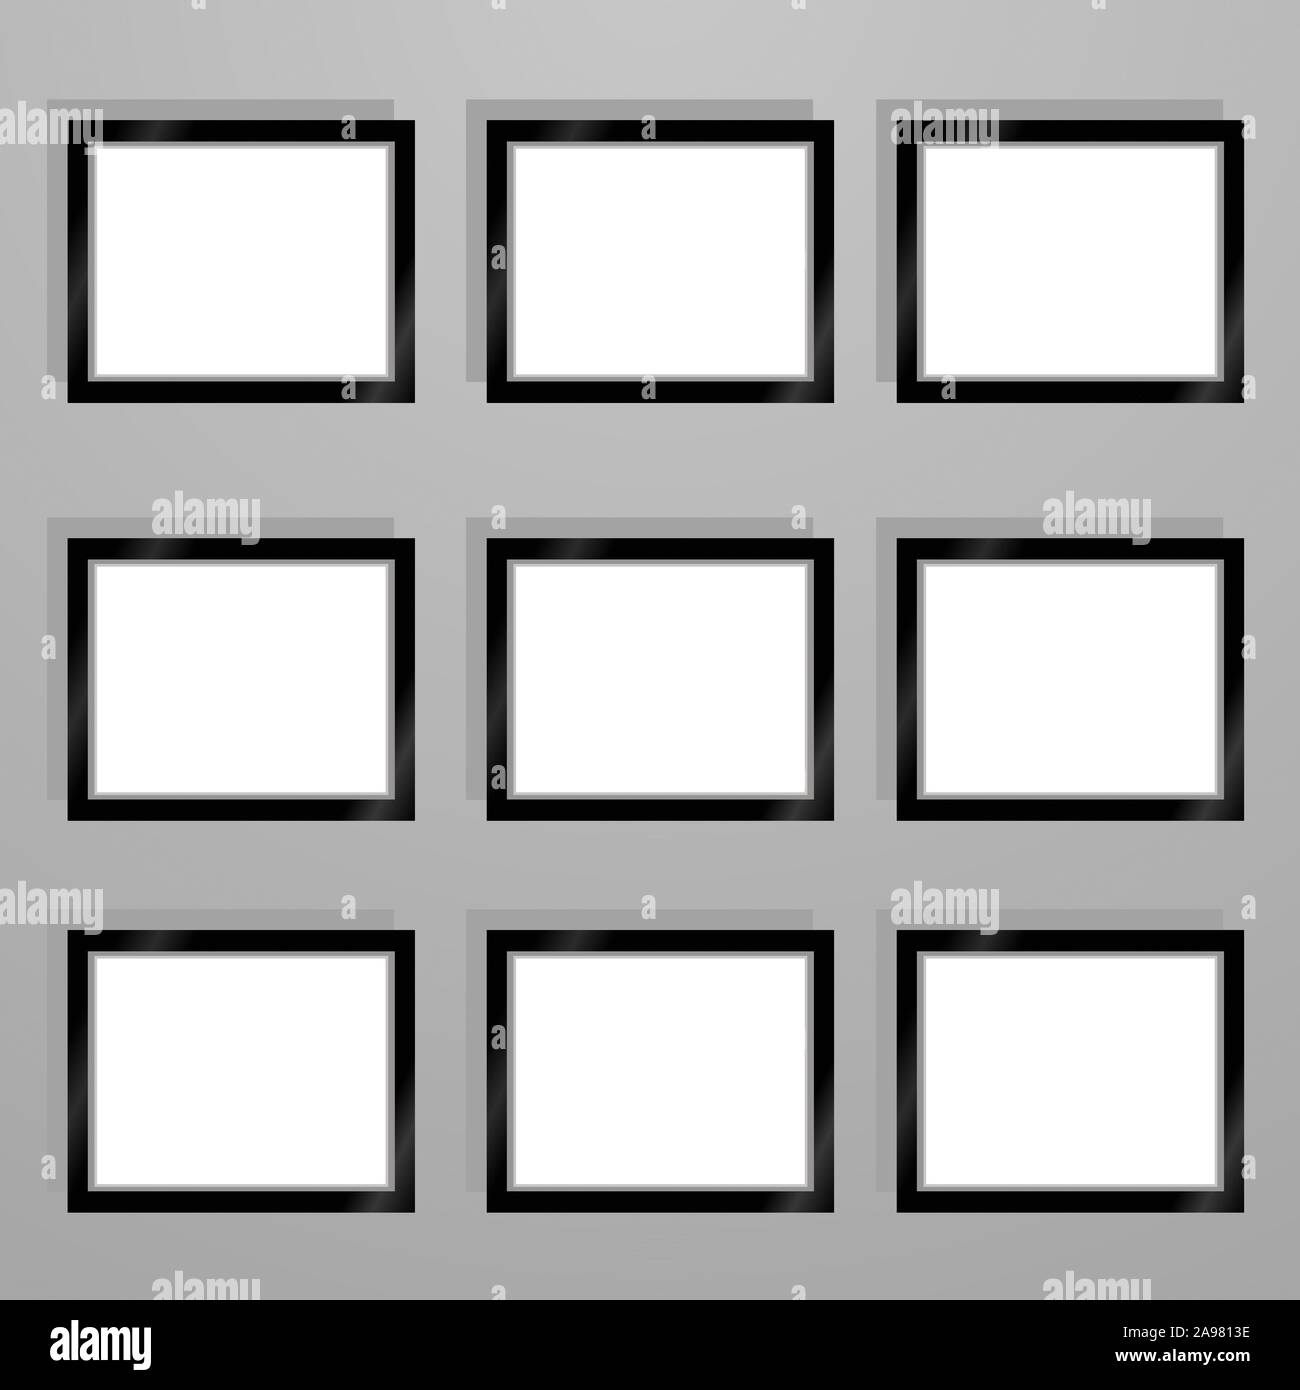 Realistic Black and White photo frame with blank empty space, place. vector illustration, isolated on background. Grey wall gallery. For presentation, Stock Vector